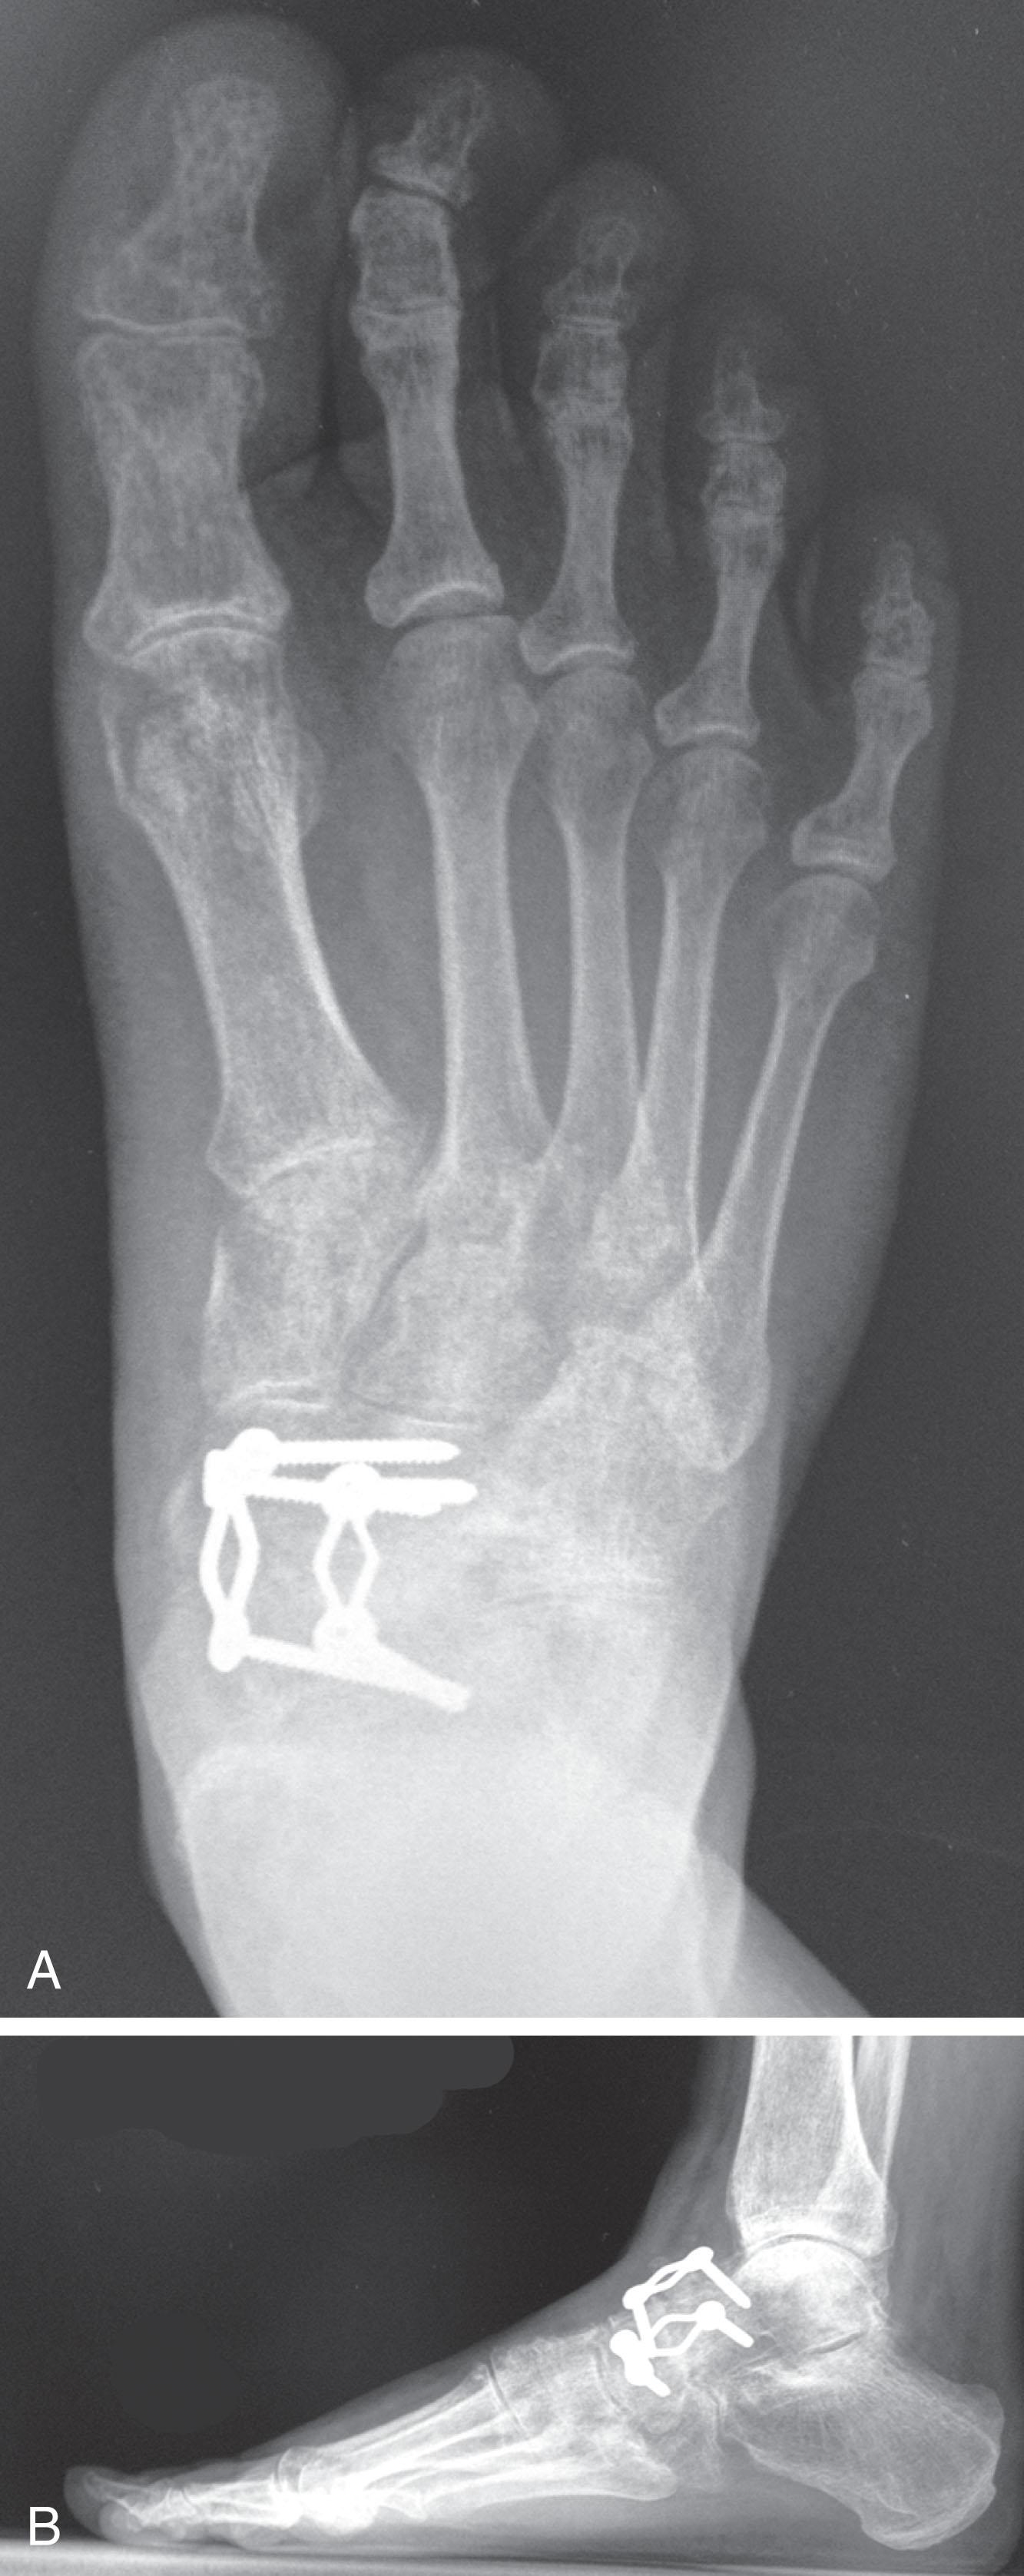 Fig. 21-11, A , Anteroposterior (AP) radiograph demonstrating talonavicular arthrodesis. B , Lateral weight-bearing radiograph showing talonavicular arthrodesis with compression plates and screws.